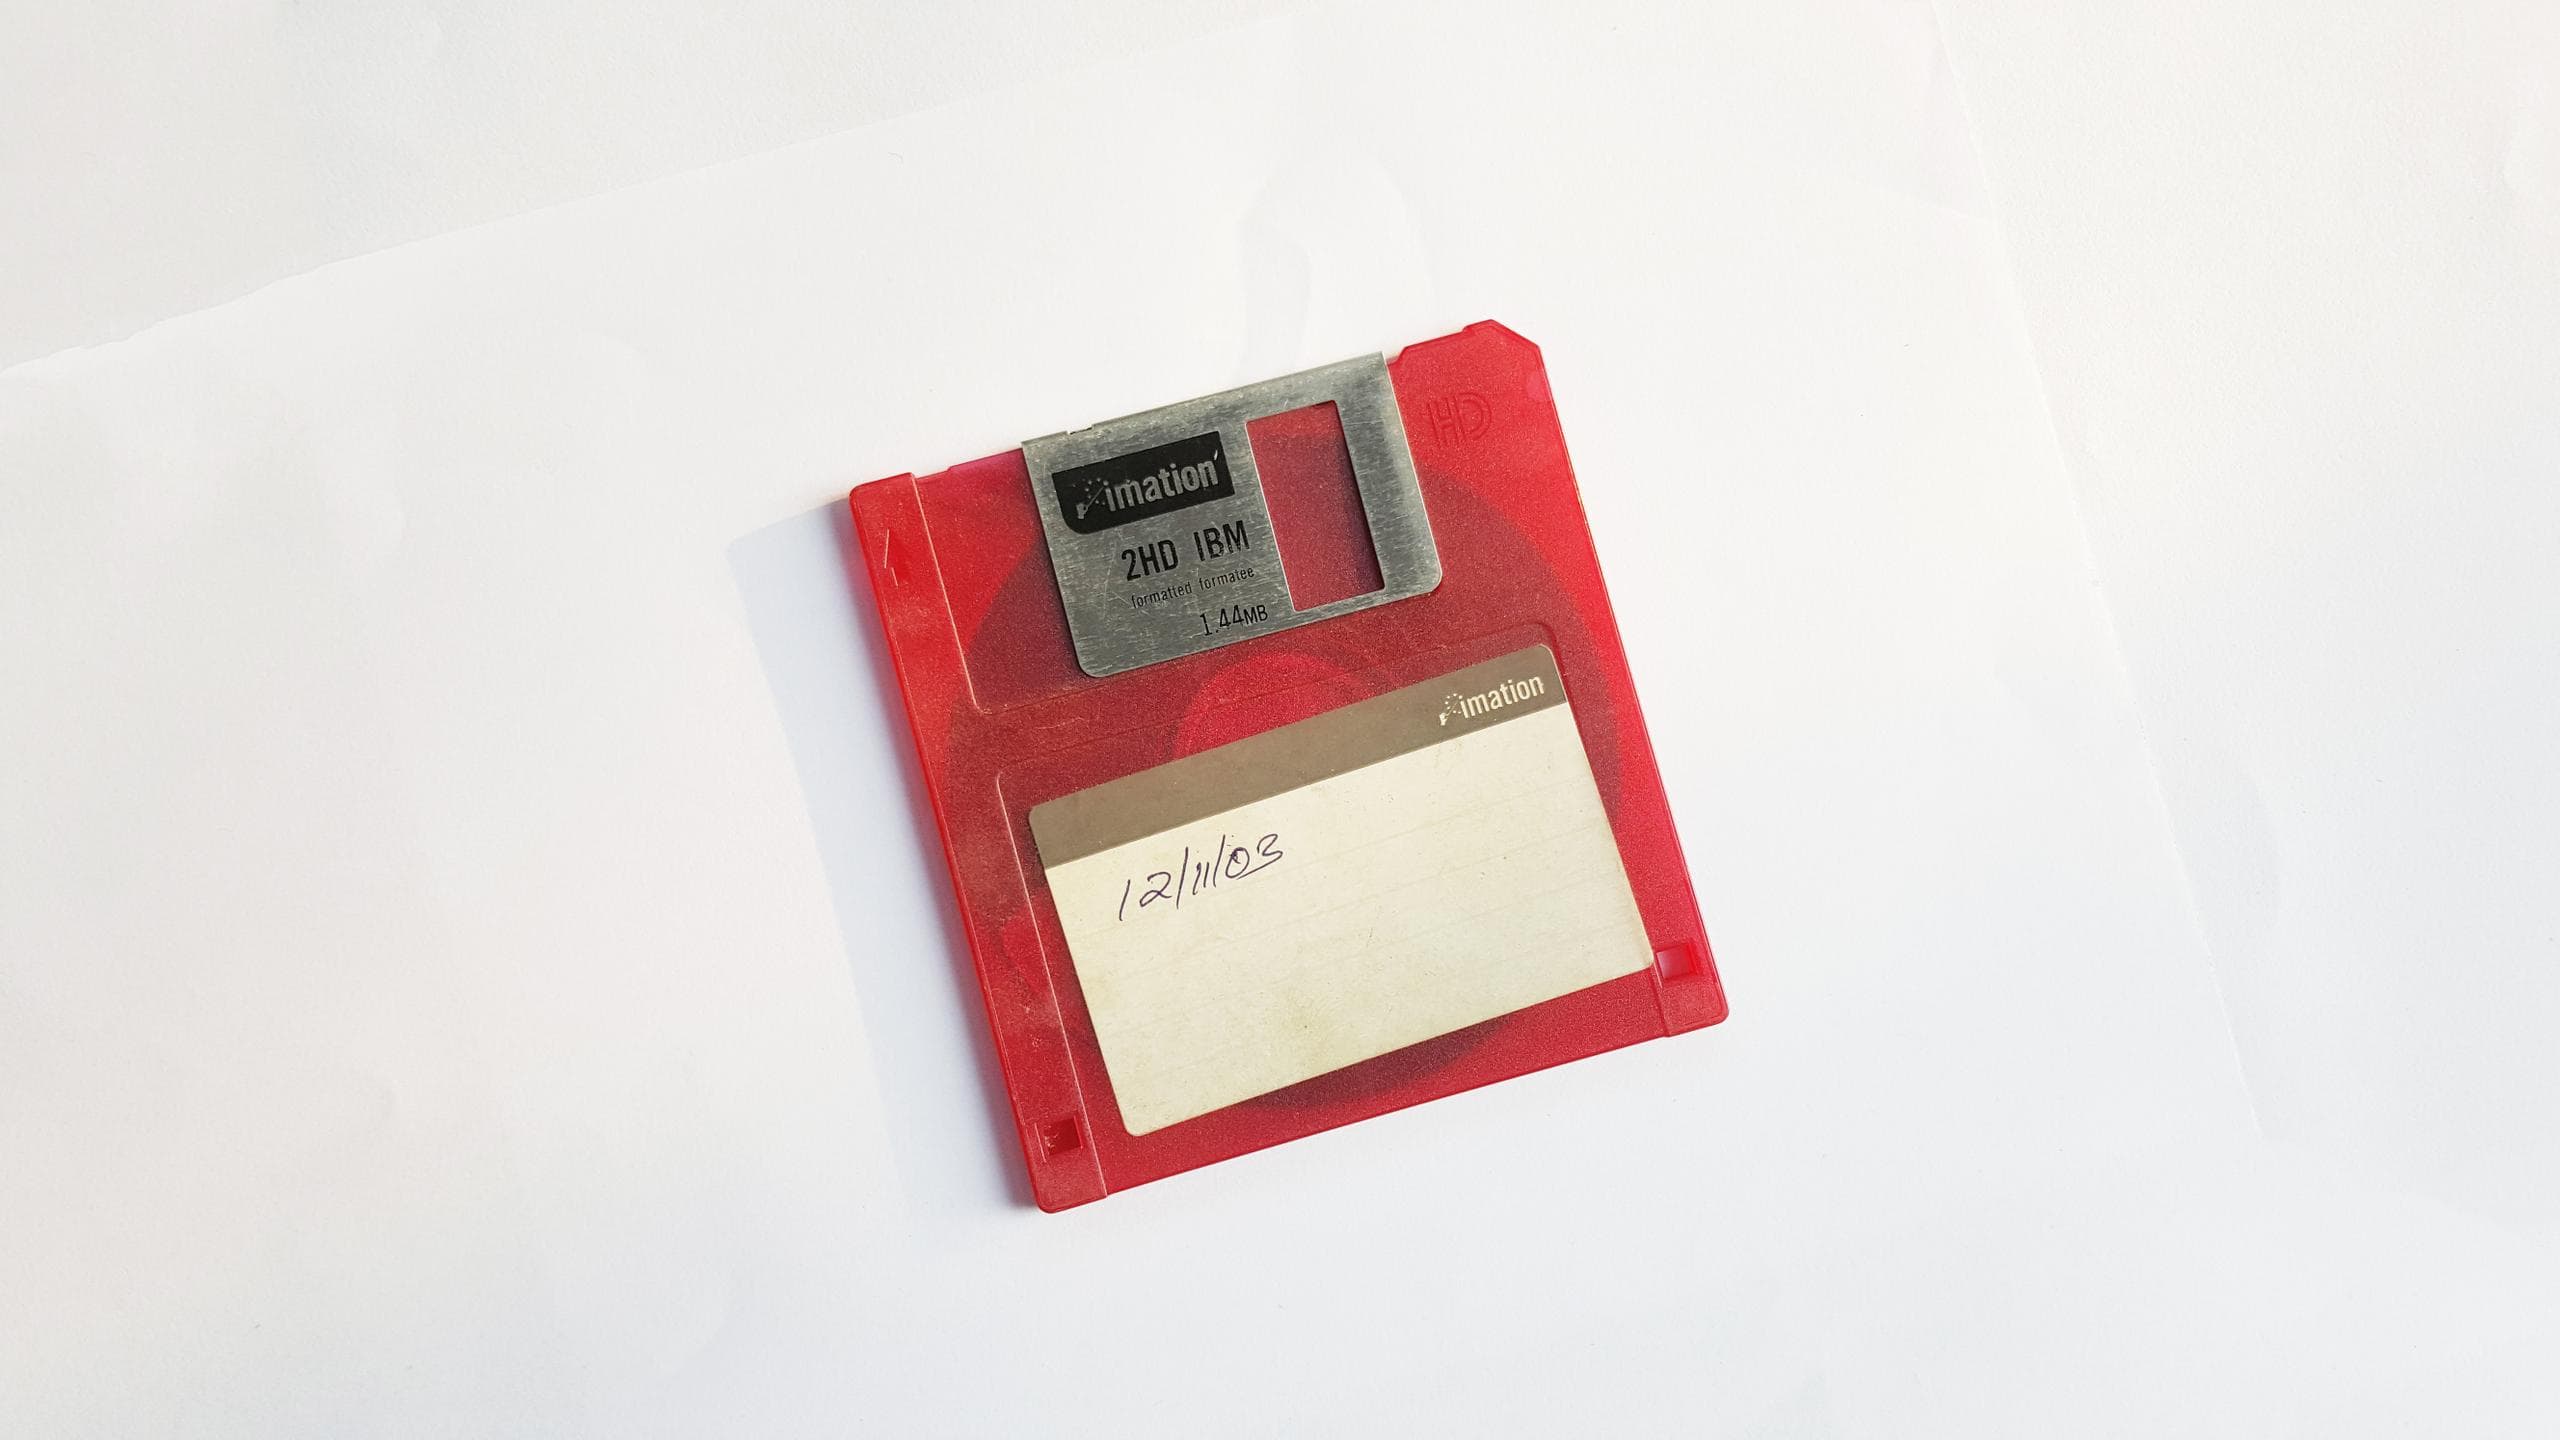 A red floppy disk on a white background.